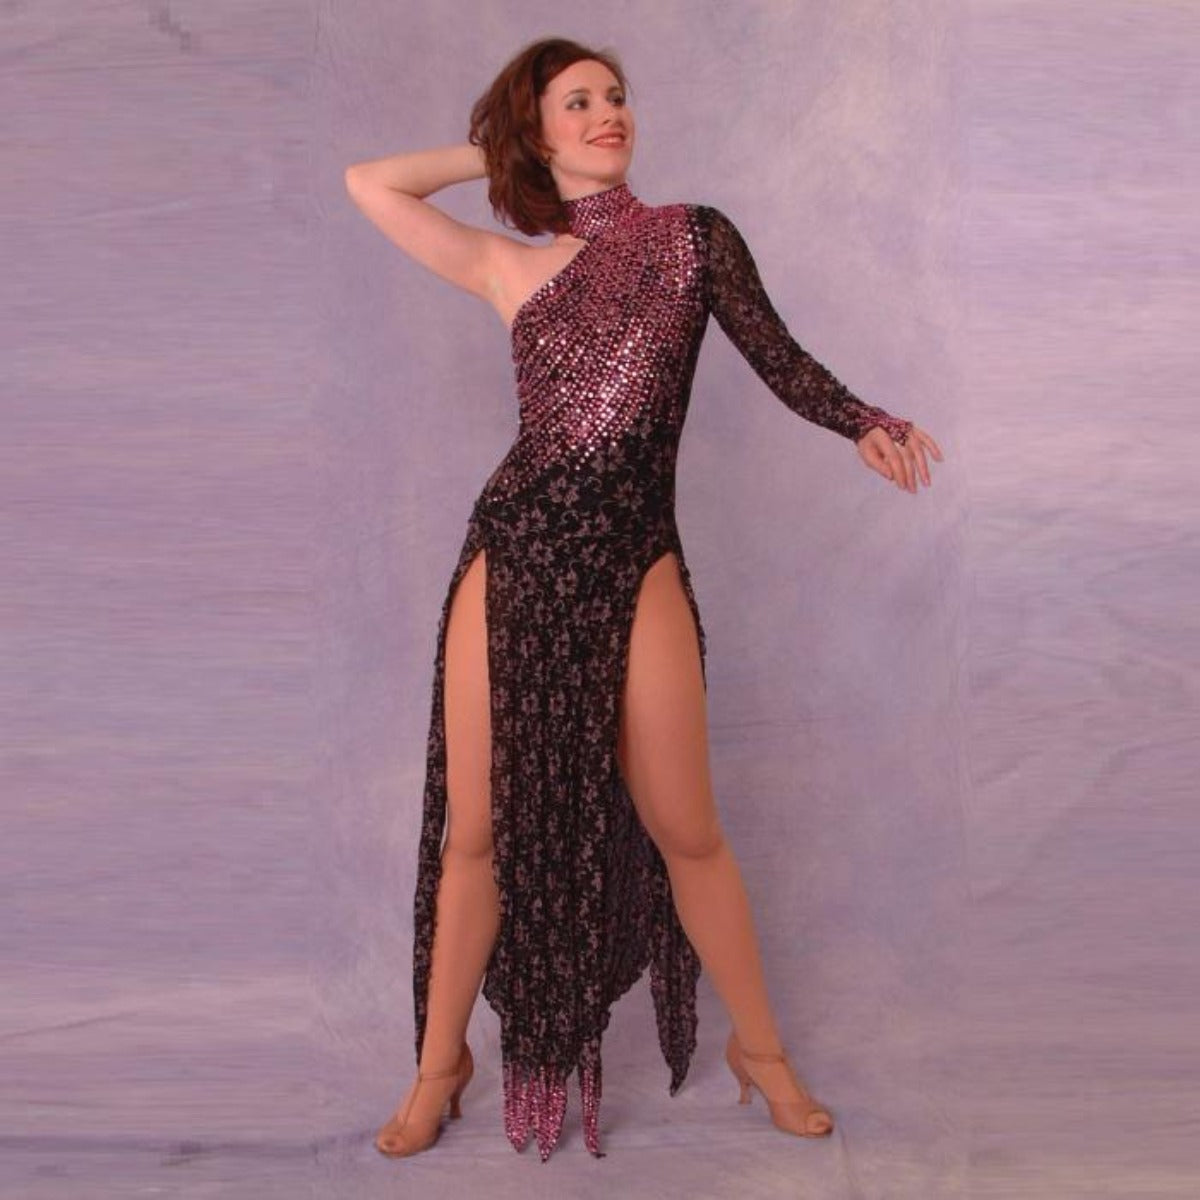 Crystal's Creations Stunning black long sleeve Latin/Rhythm dress was created in black & subtle pink stretch lace, & is embellished with over 25 gross of rose Swarovski rhinestones covering most of the bodice in a gorgeous wave pattern, featuring strap detailing on the back.